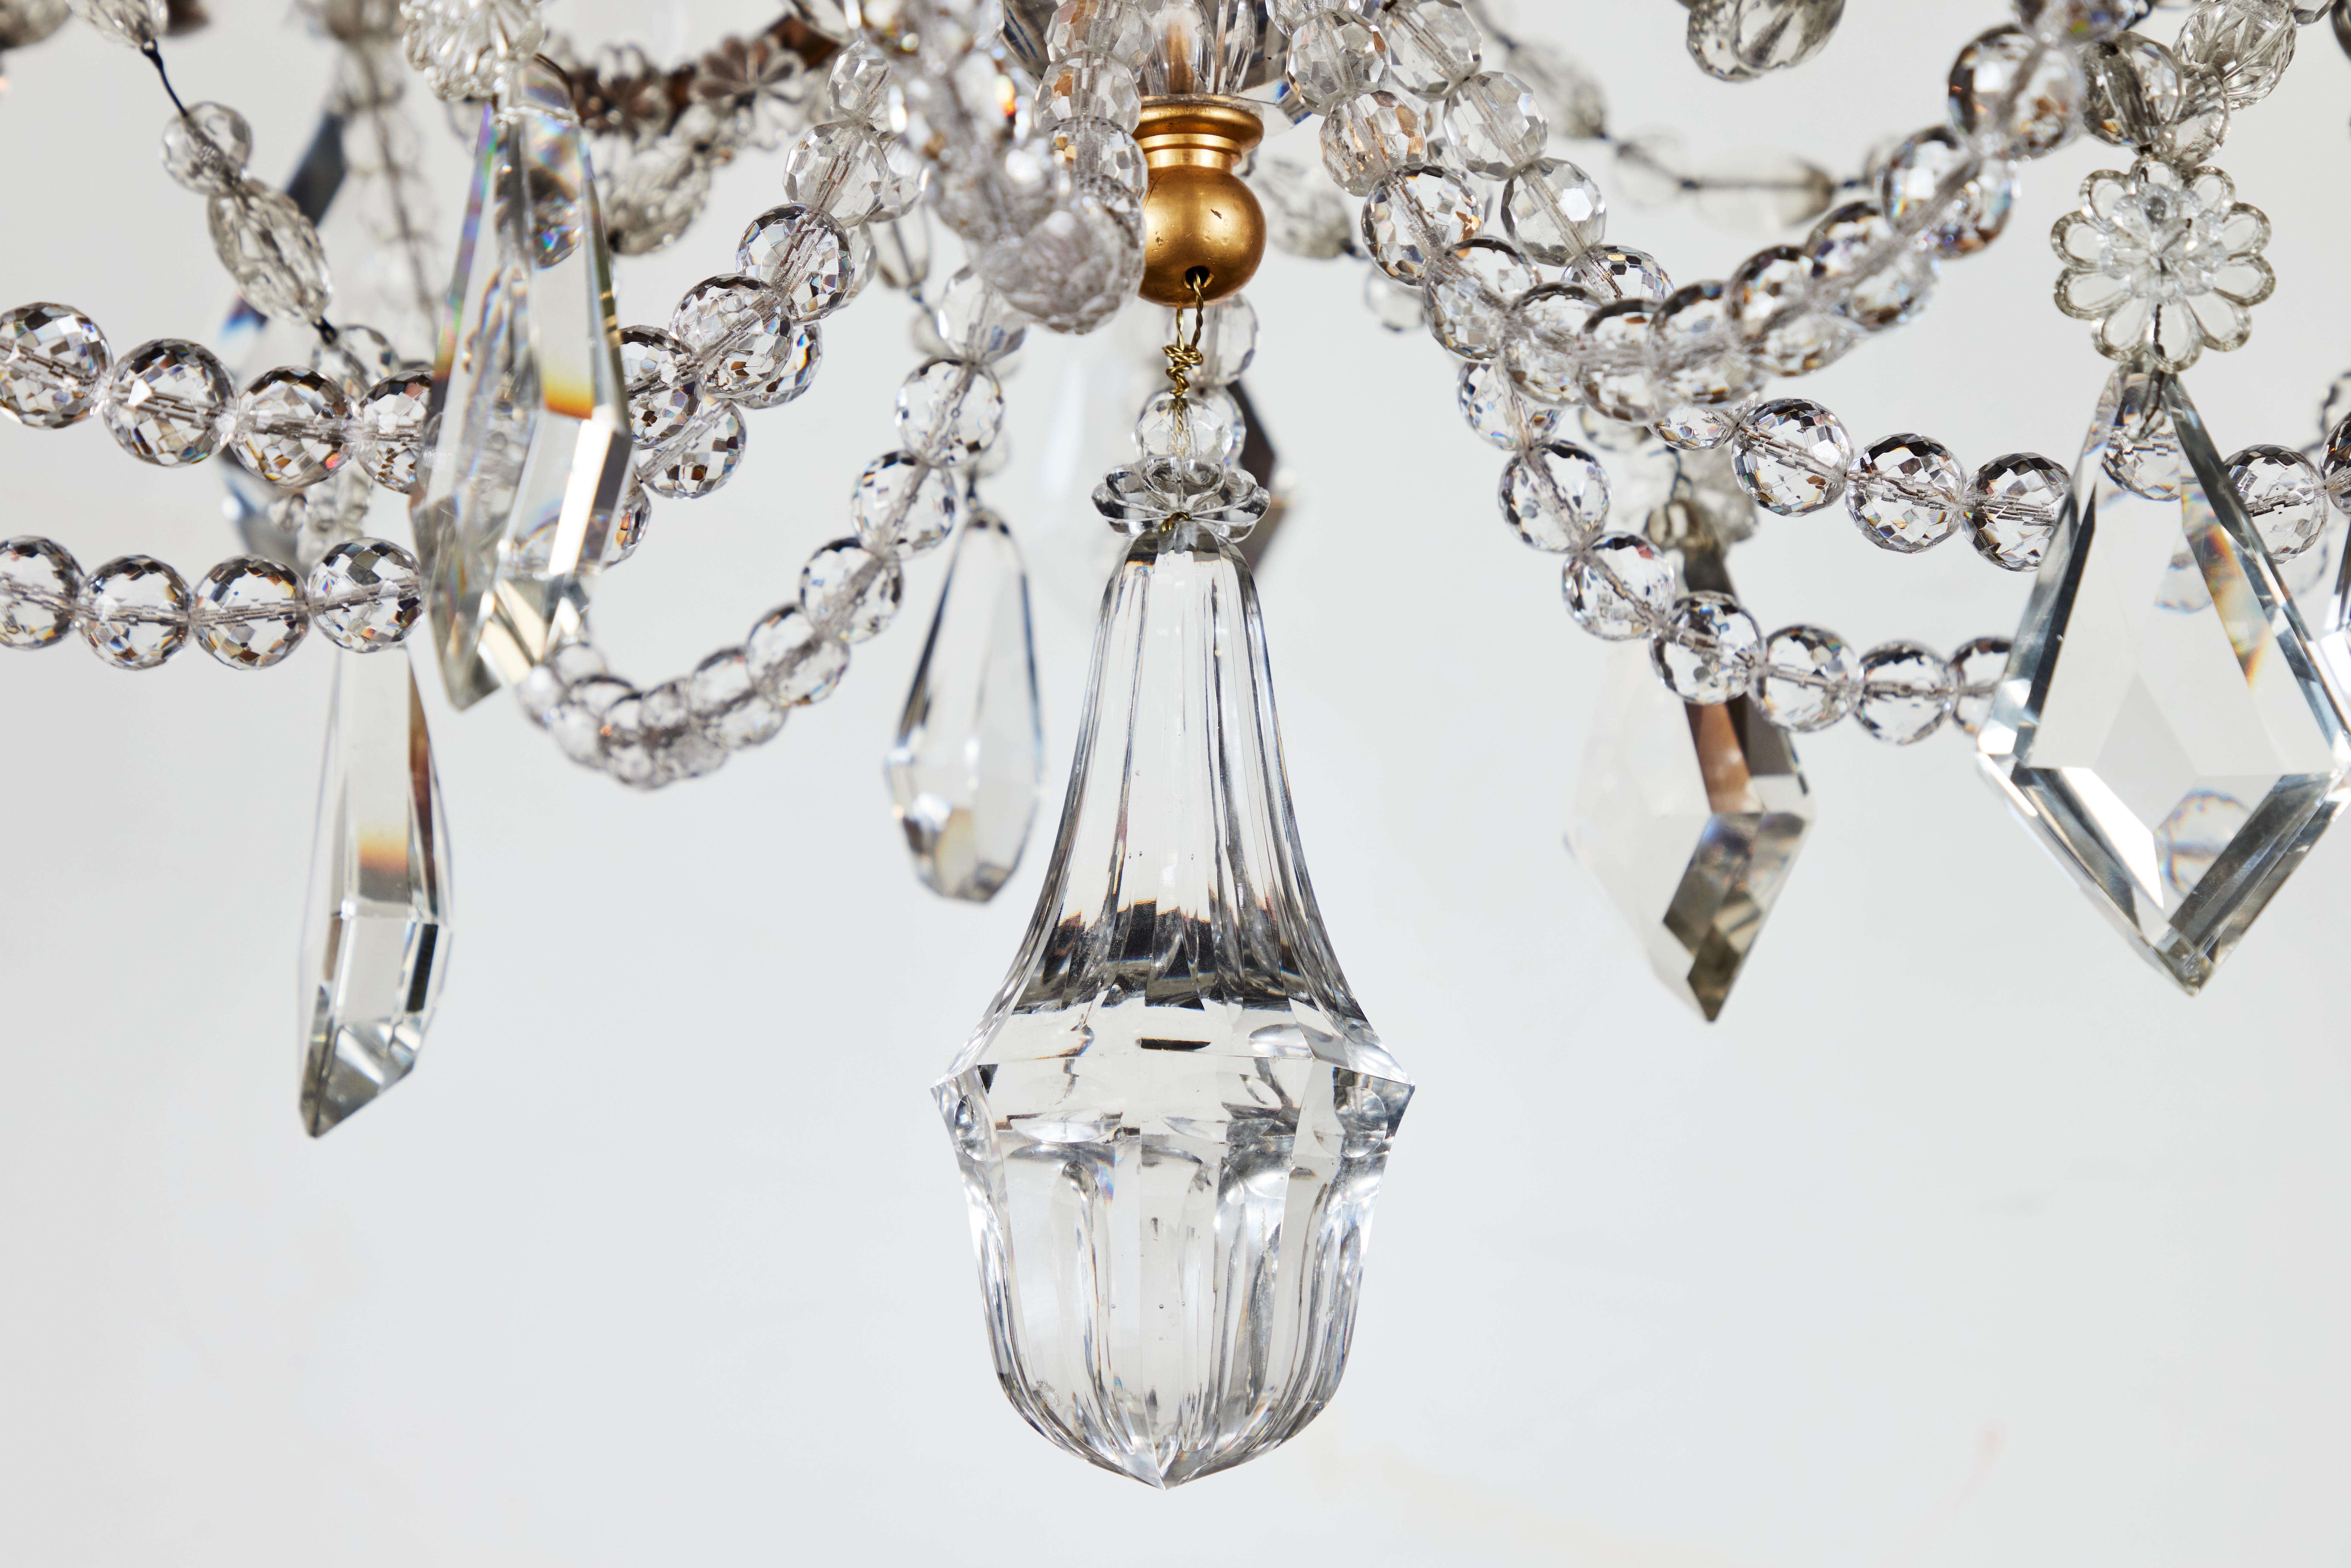 A superb, early 1800’s, French, nine-arm, gilt bronze chandelier dripping in generous amounts of cut crystal. The whole embellished with crystal towers and drops while the center features an extraoridnary series of chains with encased, marquis